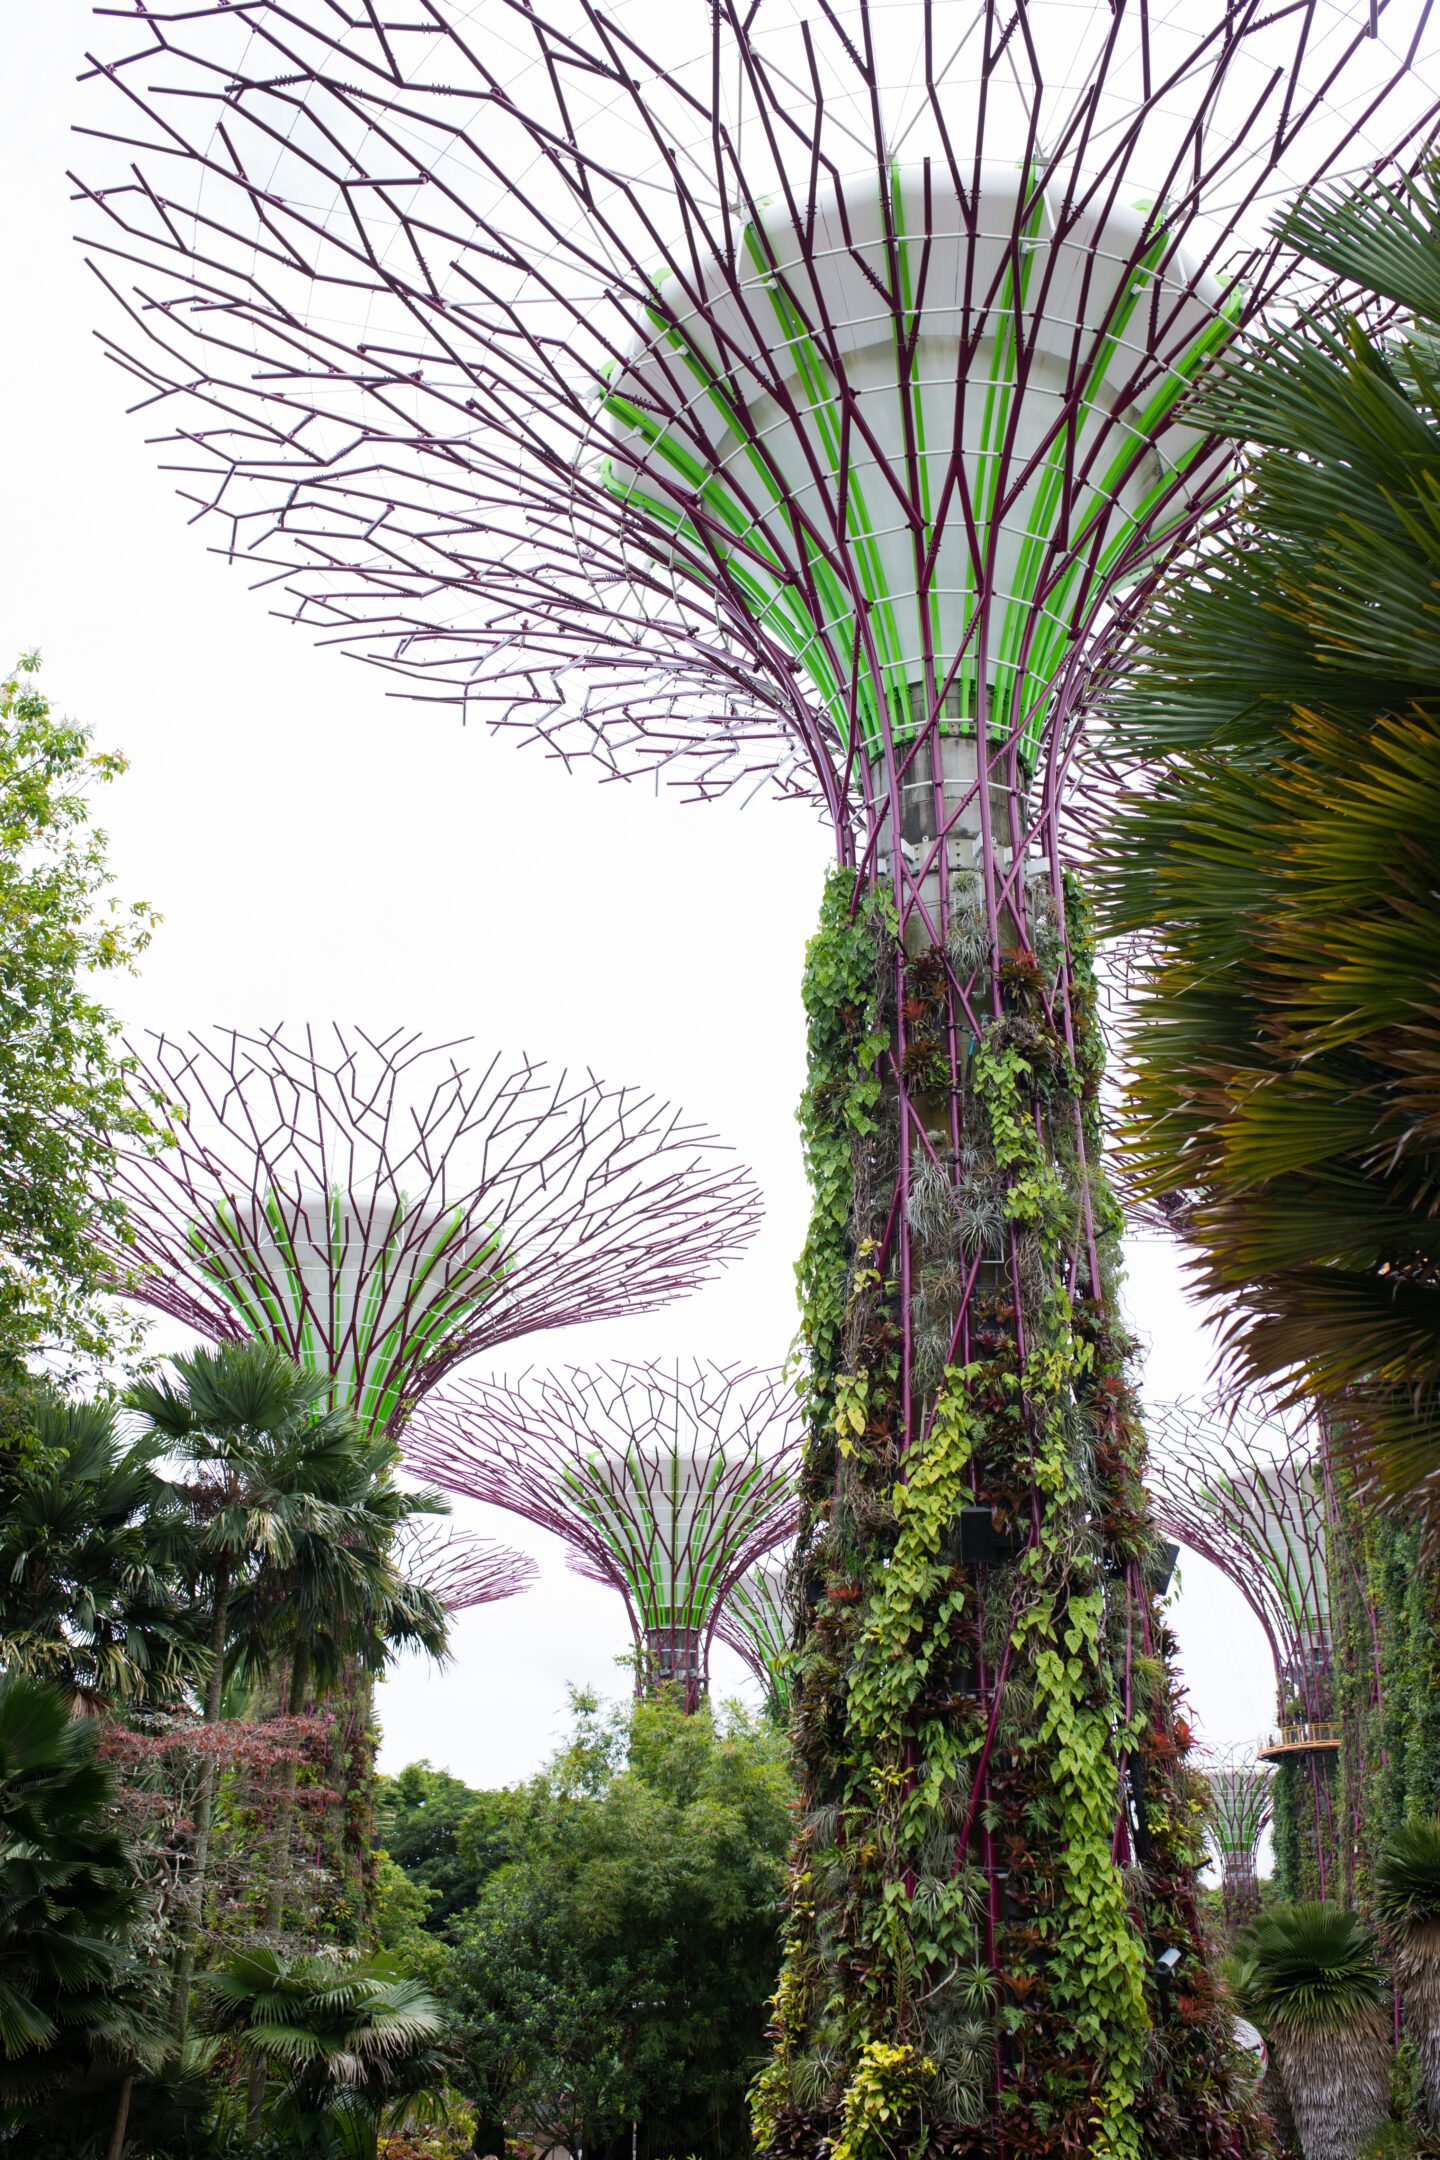 25 Photos That Will Inspire You to Visit Singapore